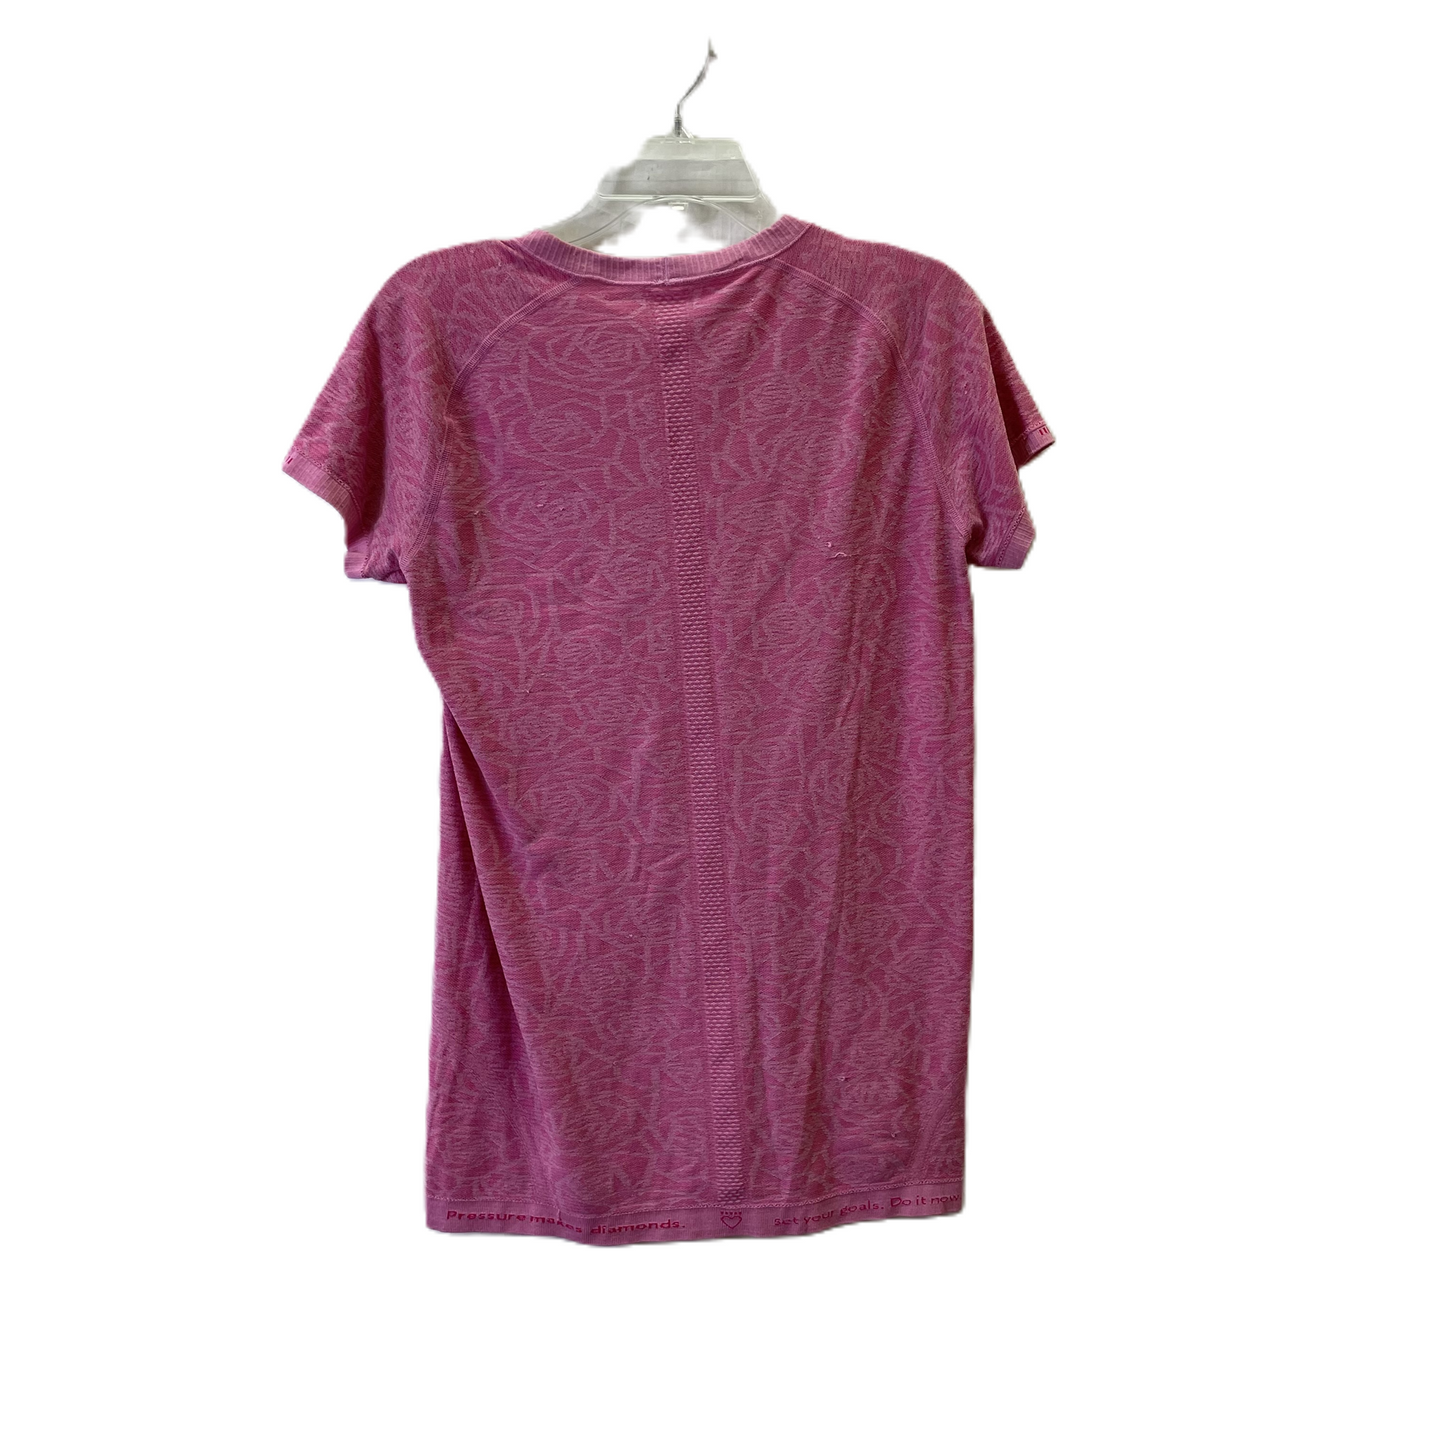 Pink Athletic Top Short Sleeve By Lululemon, Size: L